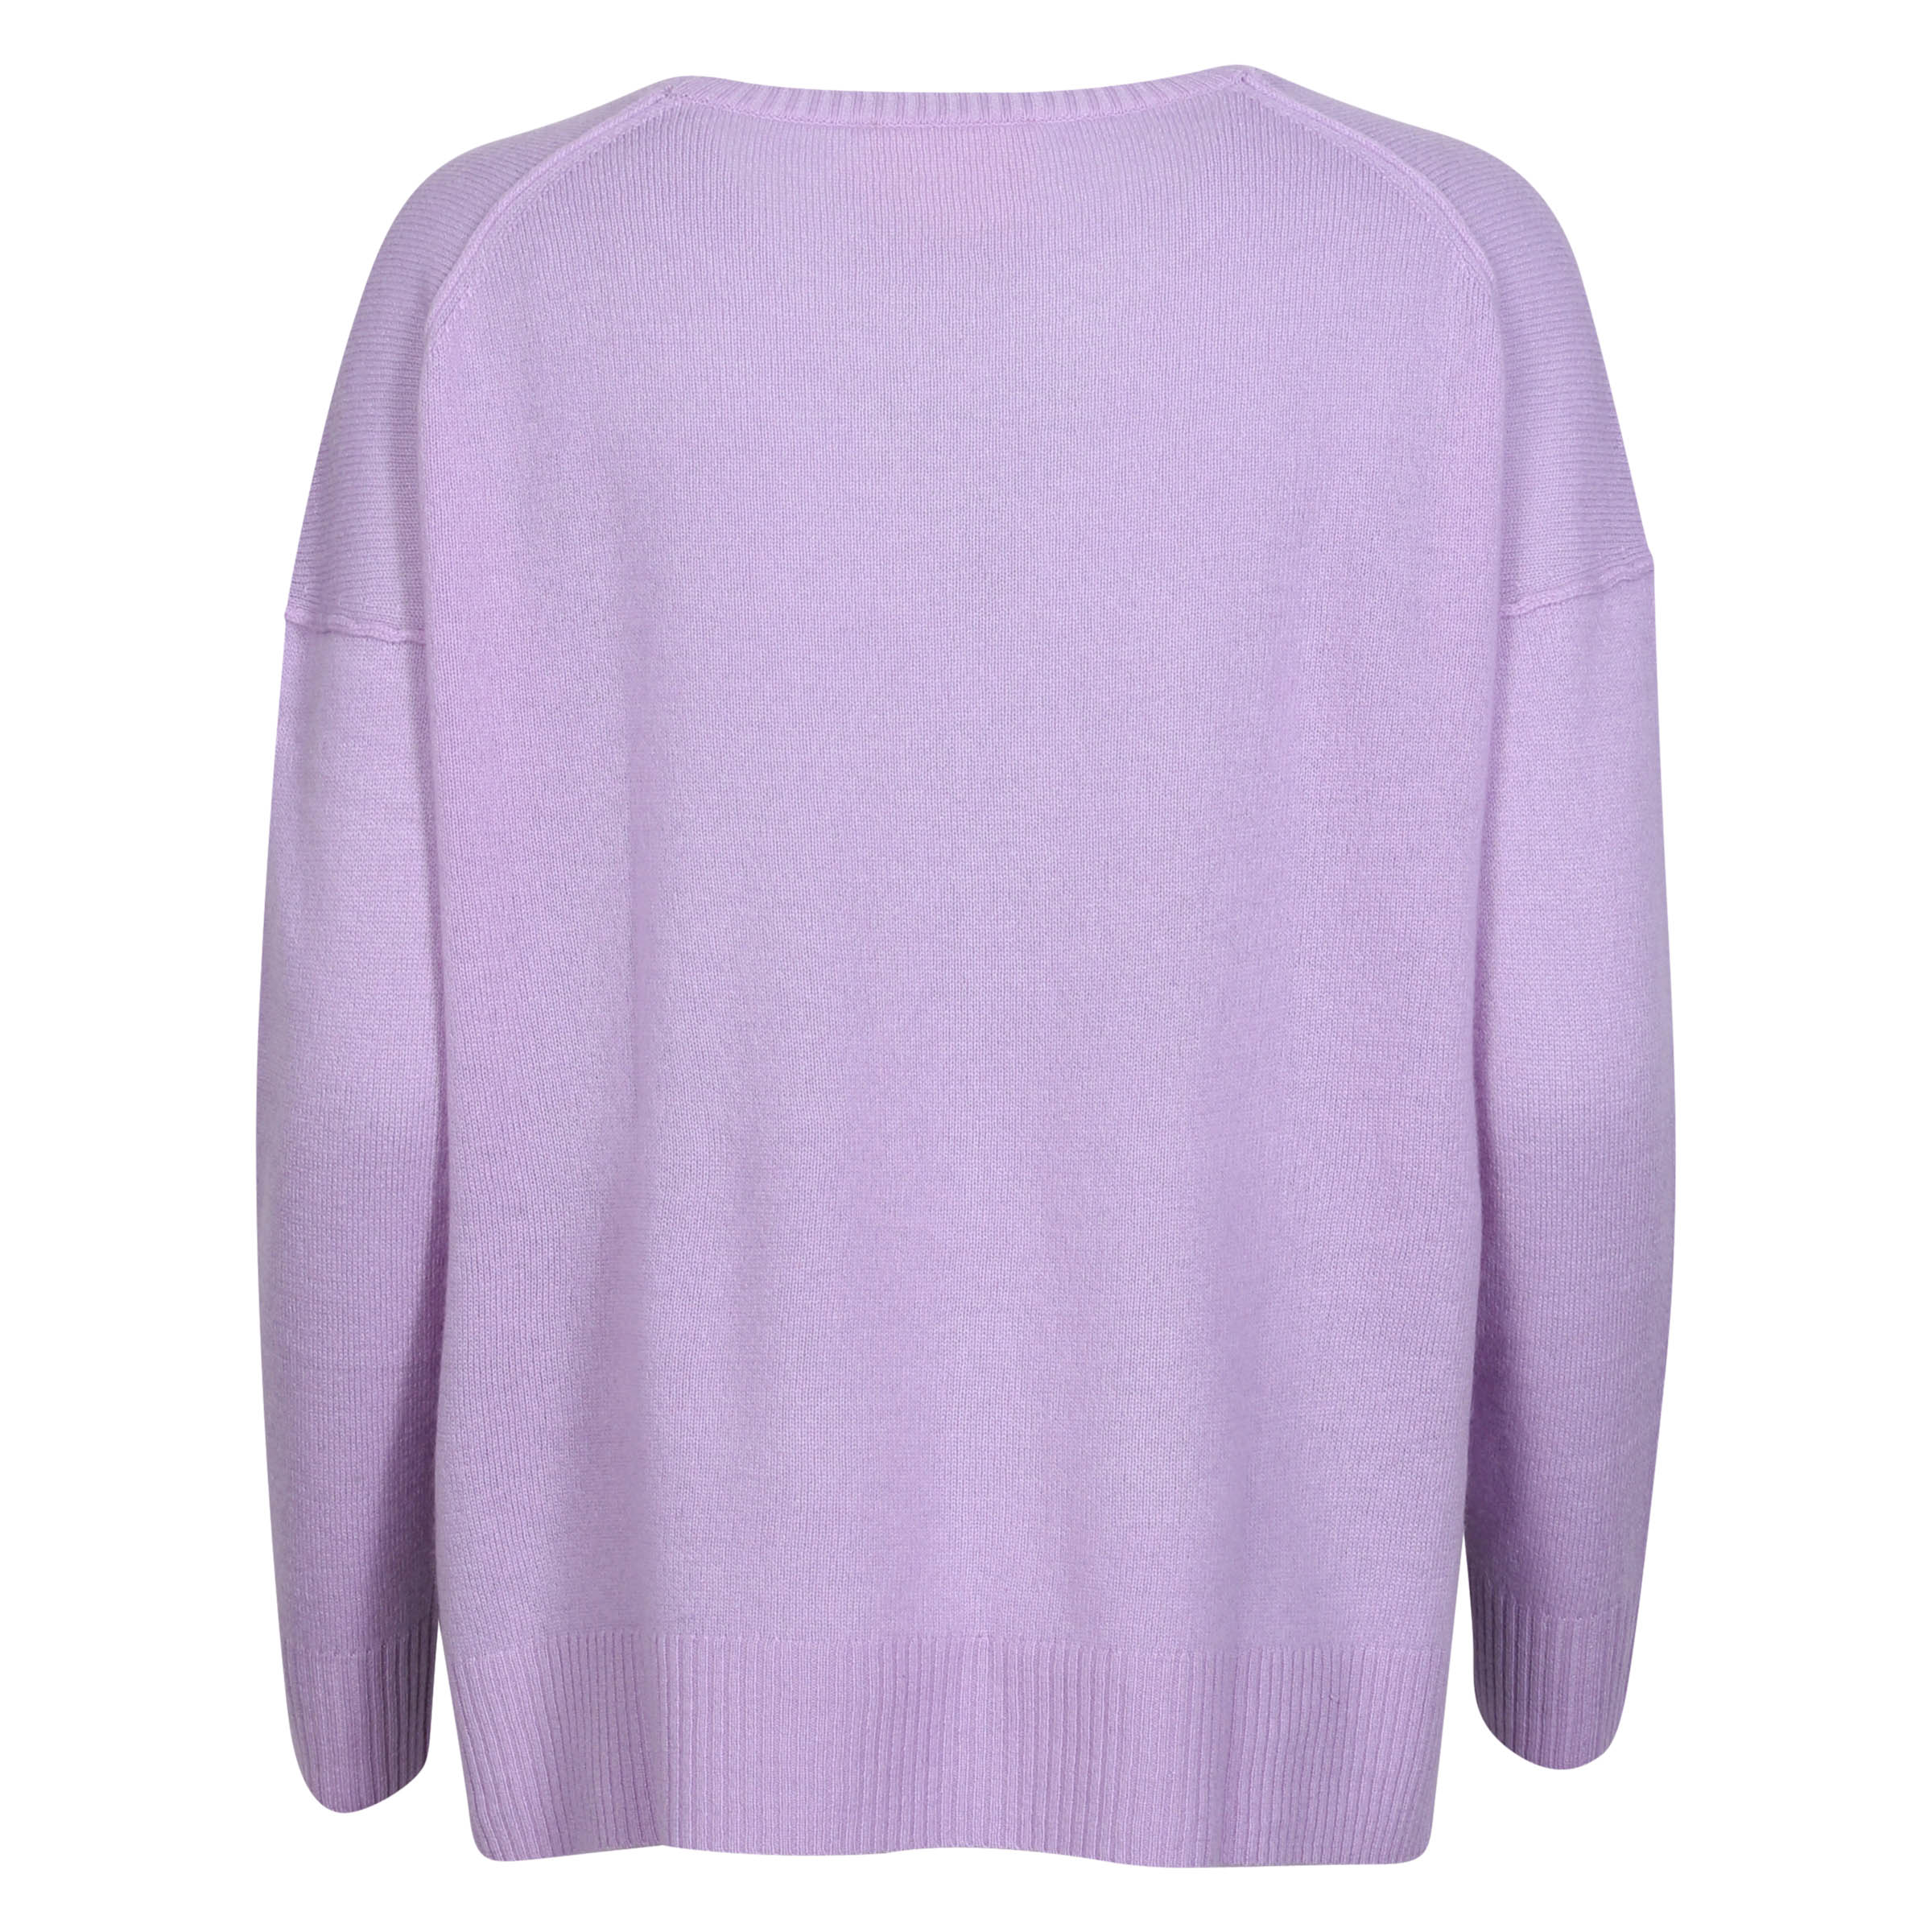 Absolut Cashmere Oversized Sweater Kenza Lilac XS